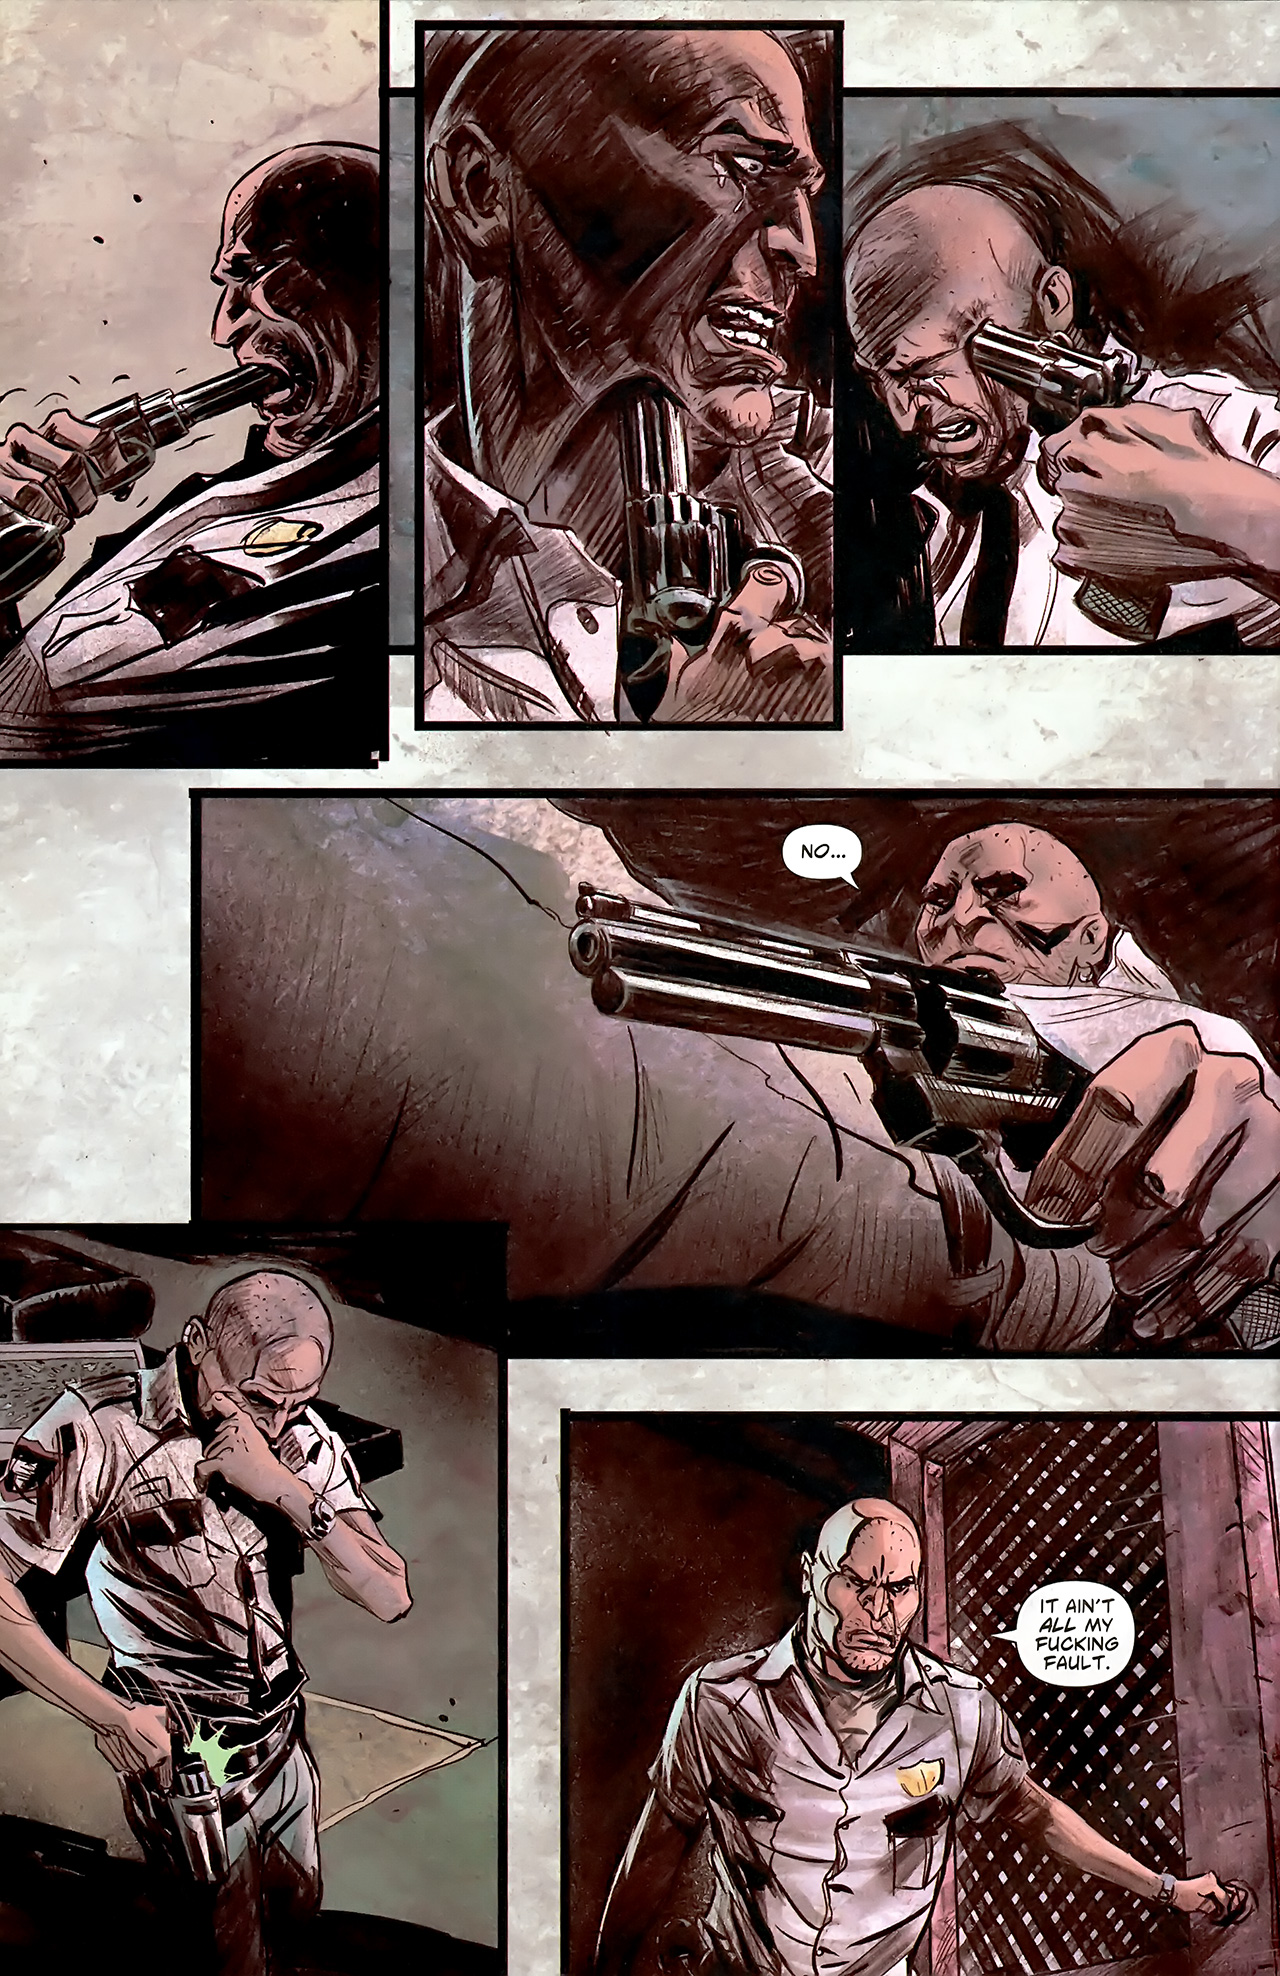 Scalped #20 - The Boudoir Stomp, Part Two: Conclusion 